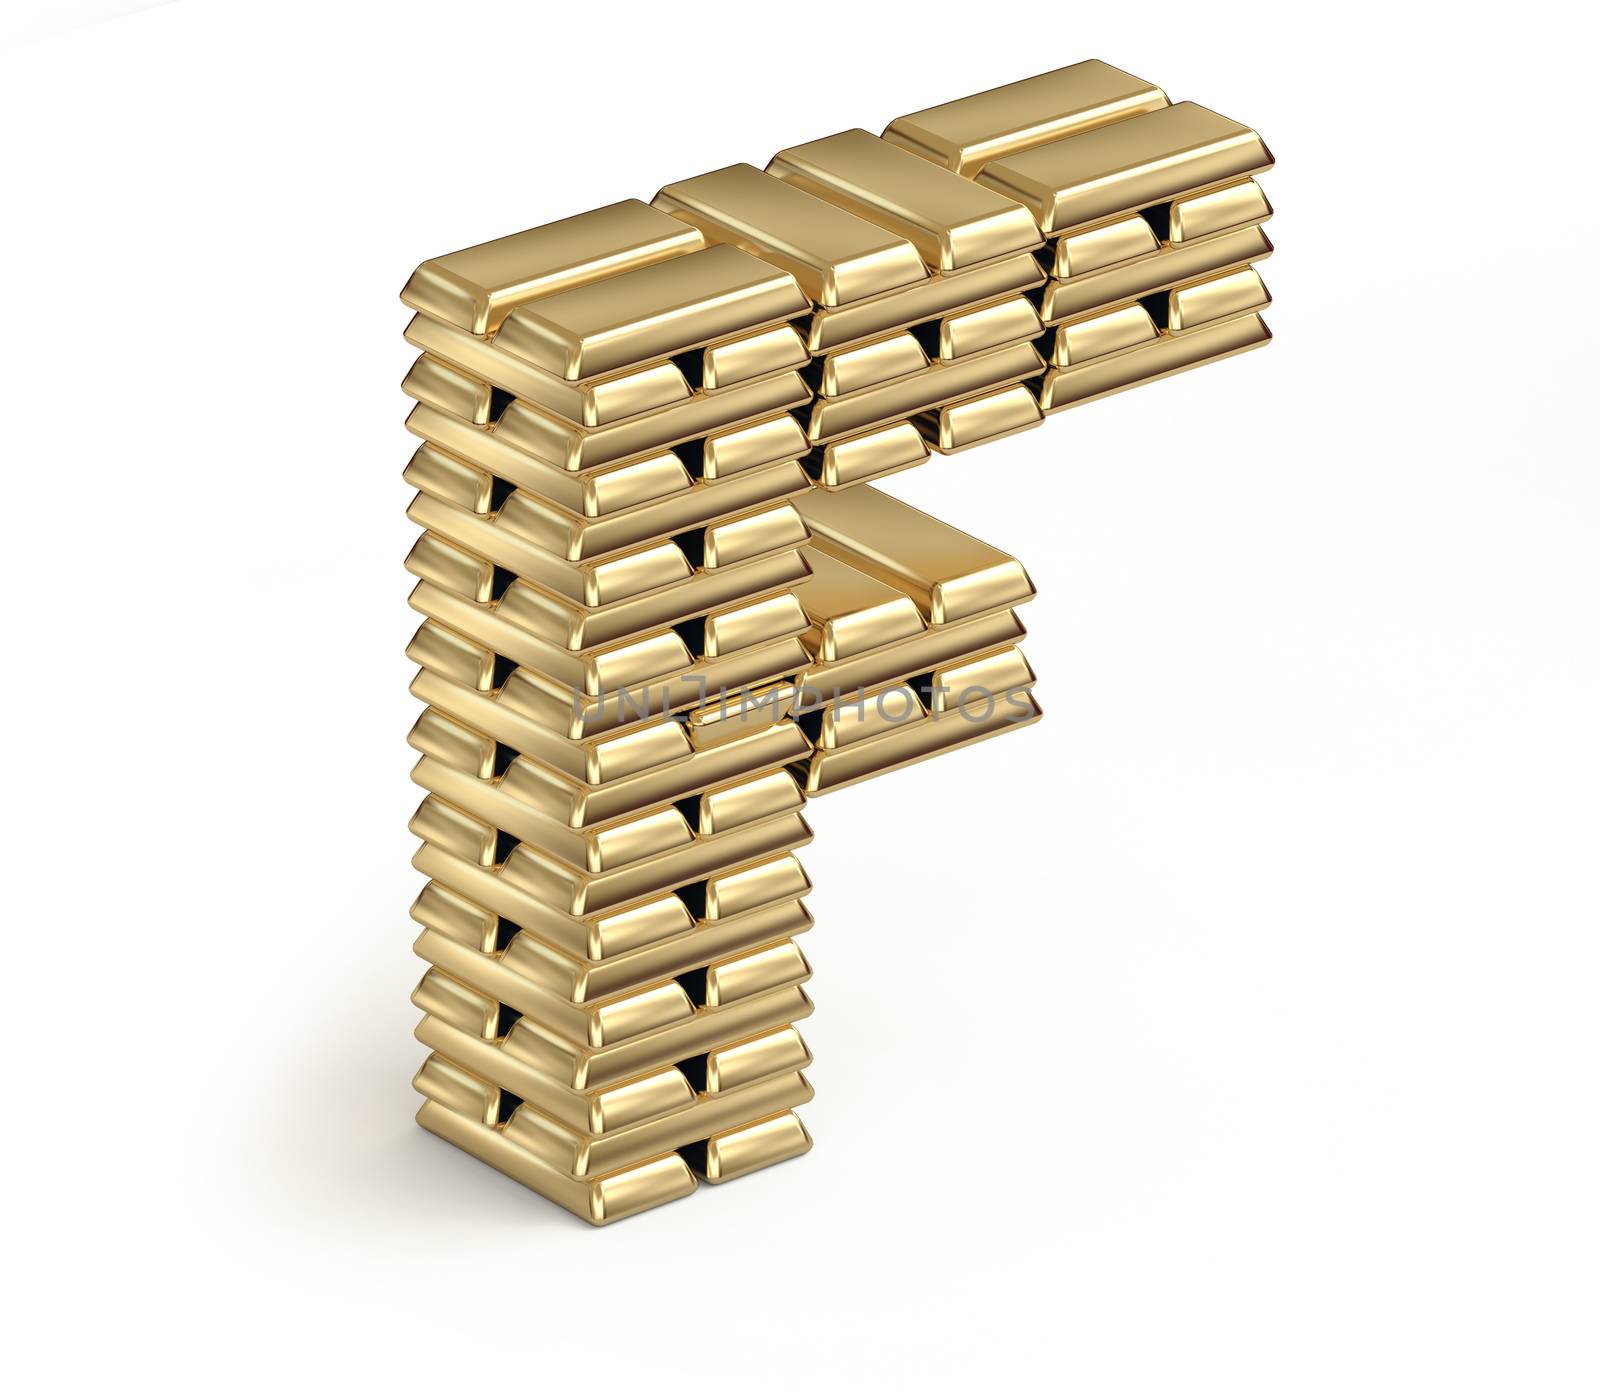 Letter F from stacked gold bars 3d in isometric on white background